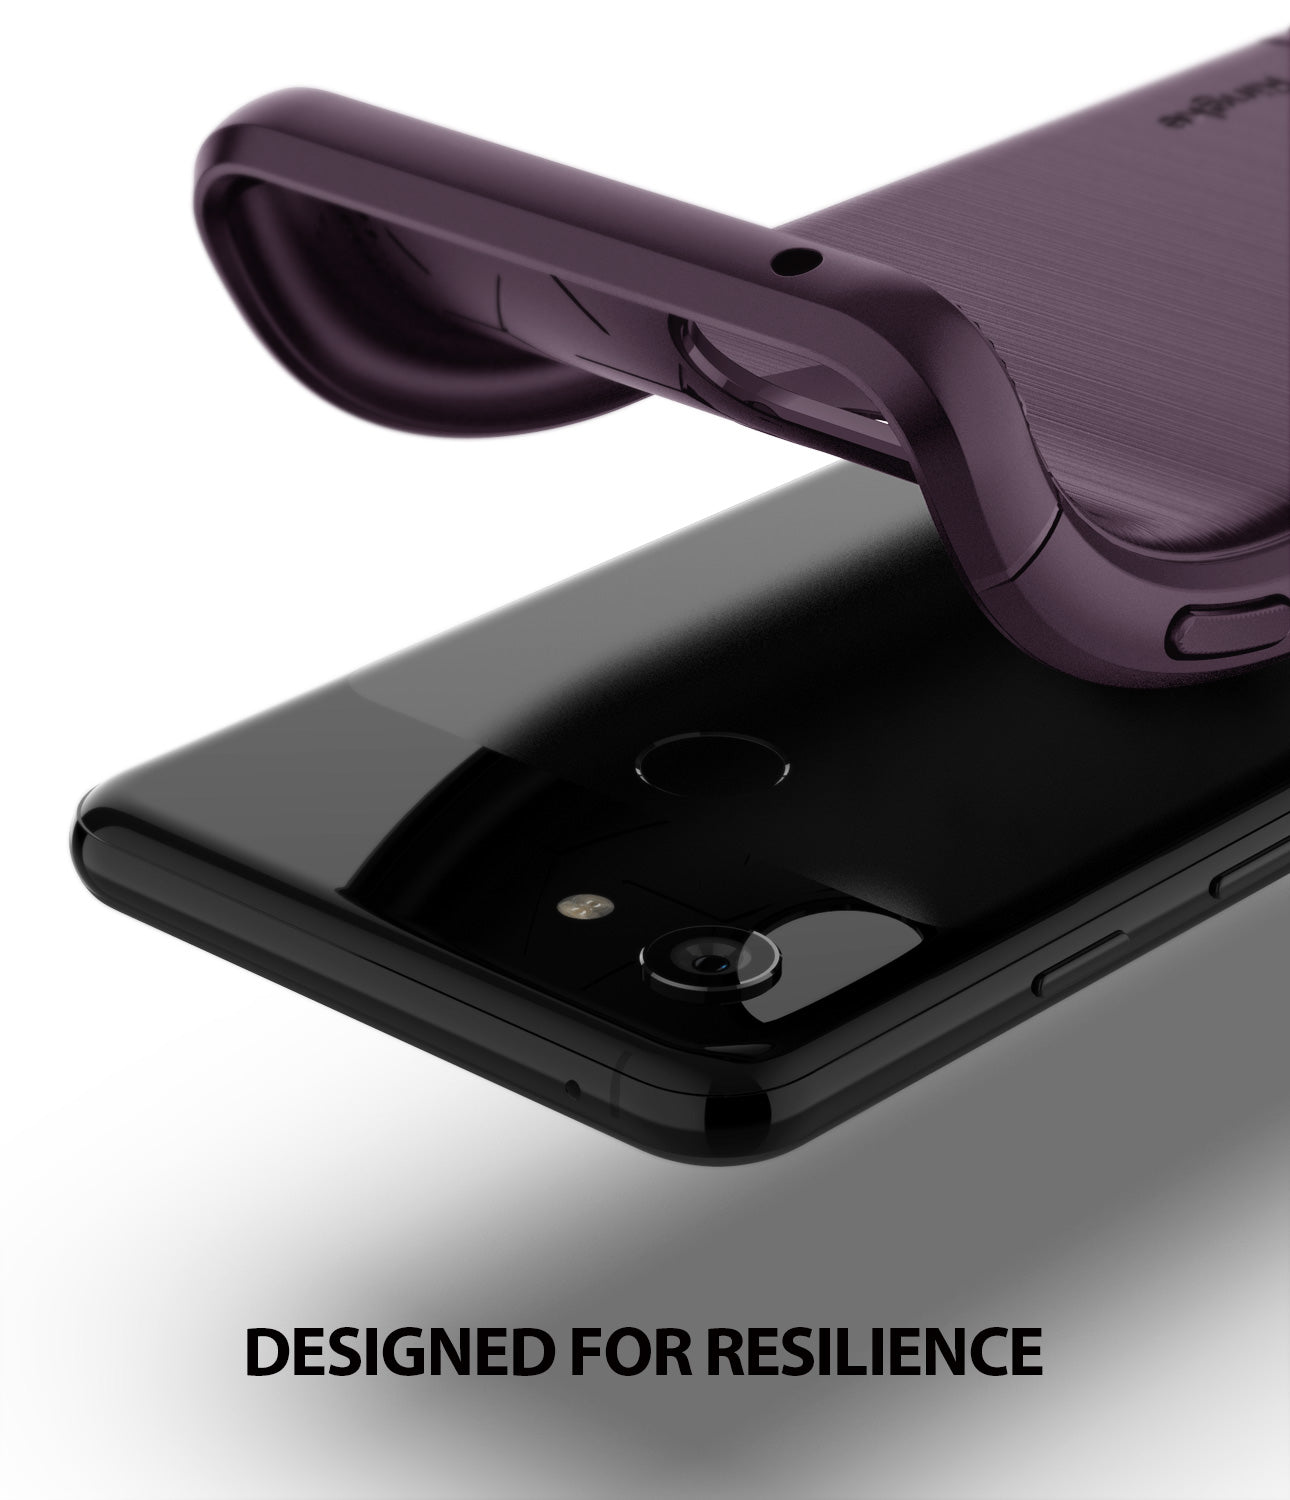 Google Pixel 3 XL Case | Onyx - Designed for resilience